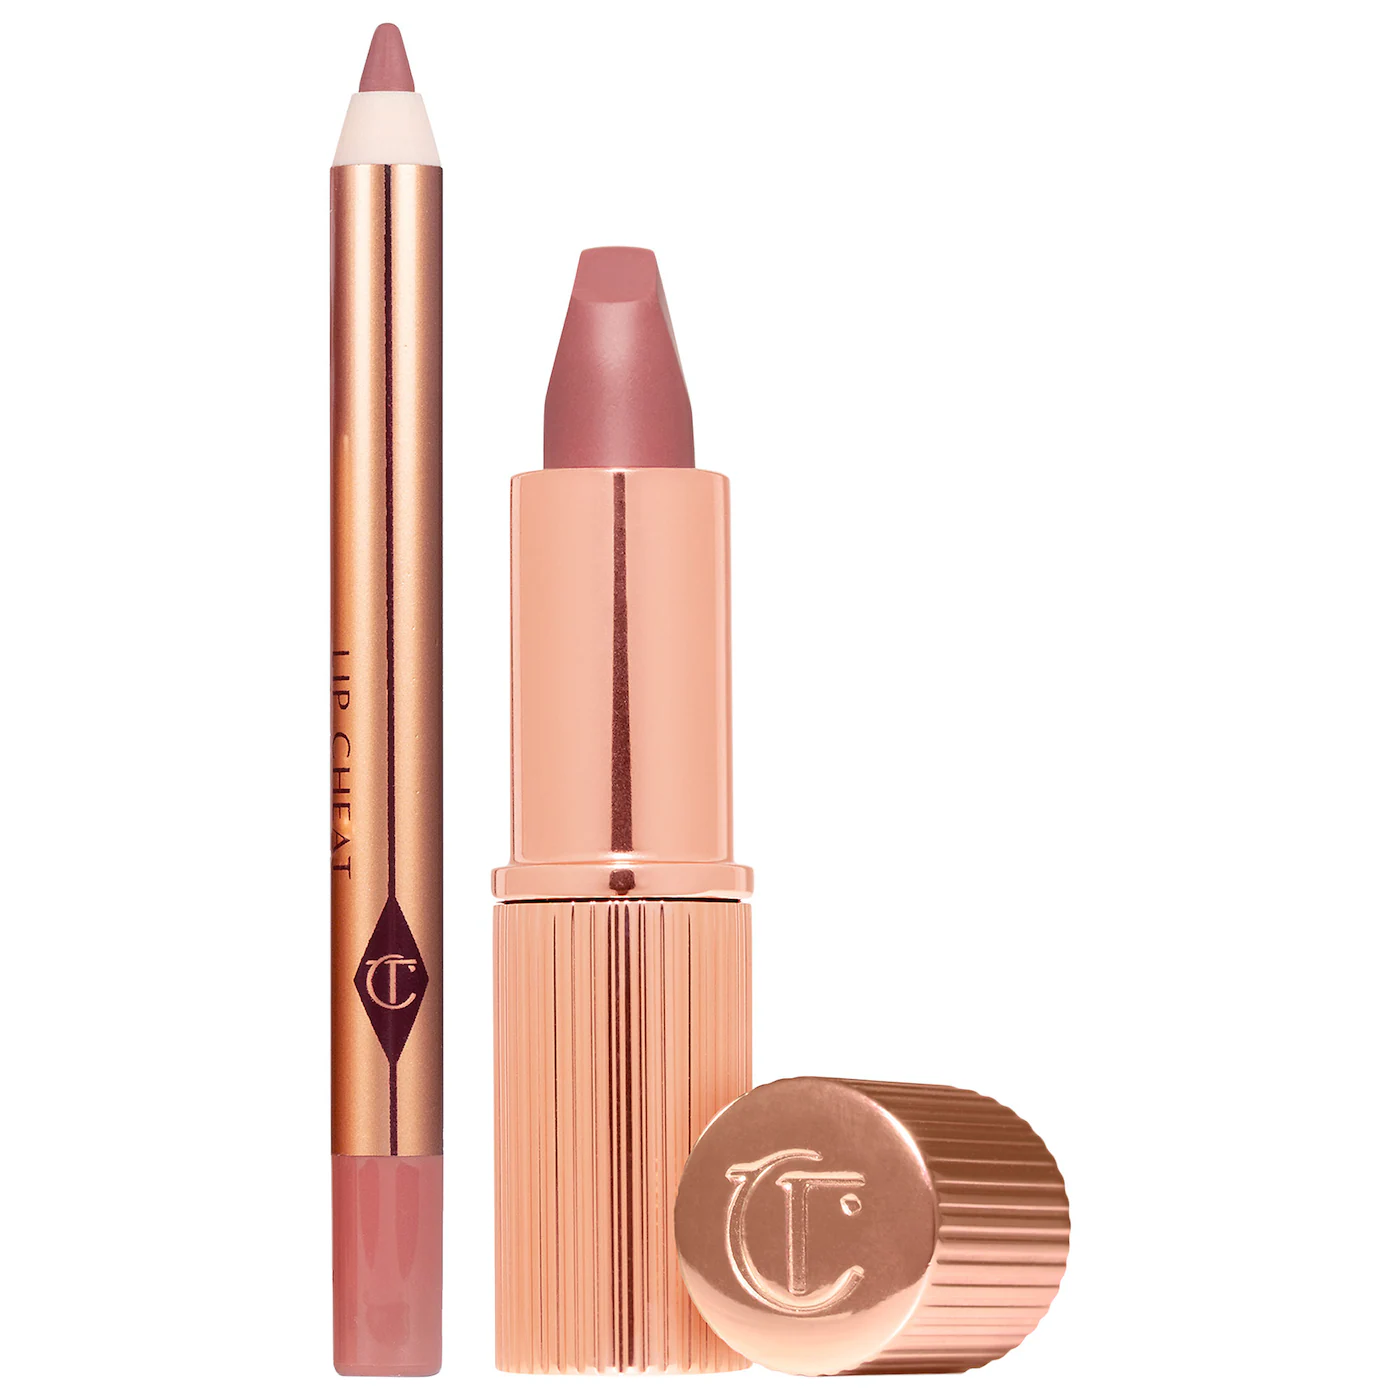 product shot of Charlotte Tilbury Pillow Talk lipstick and liner set